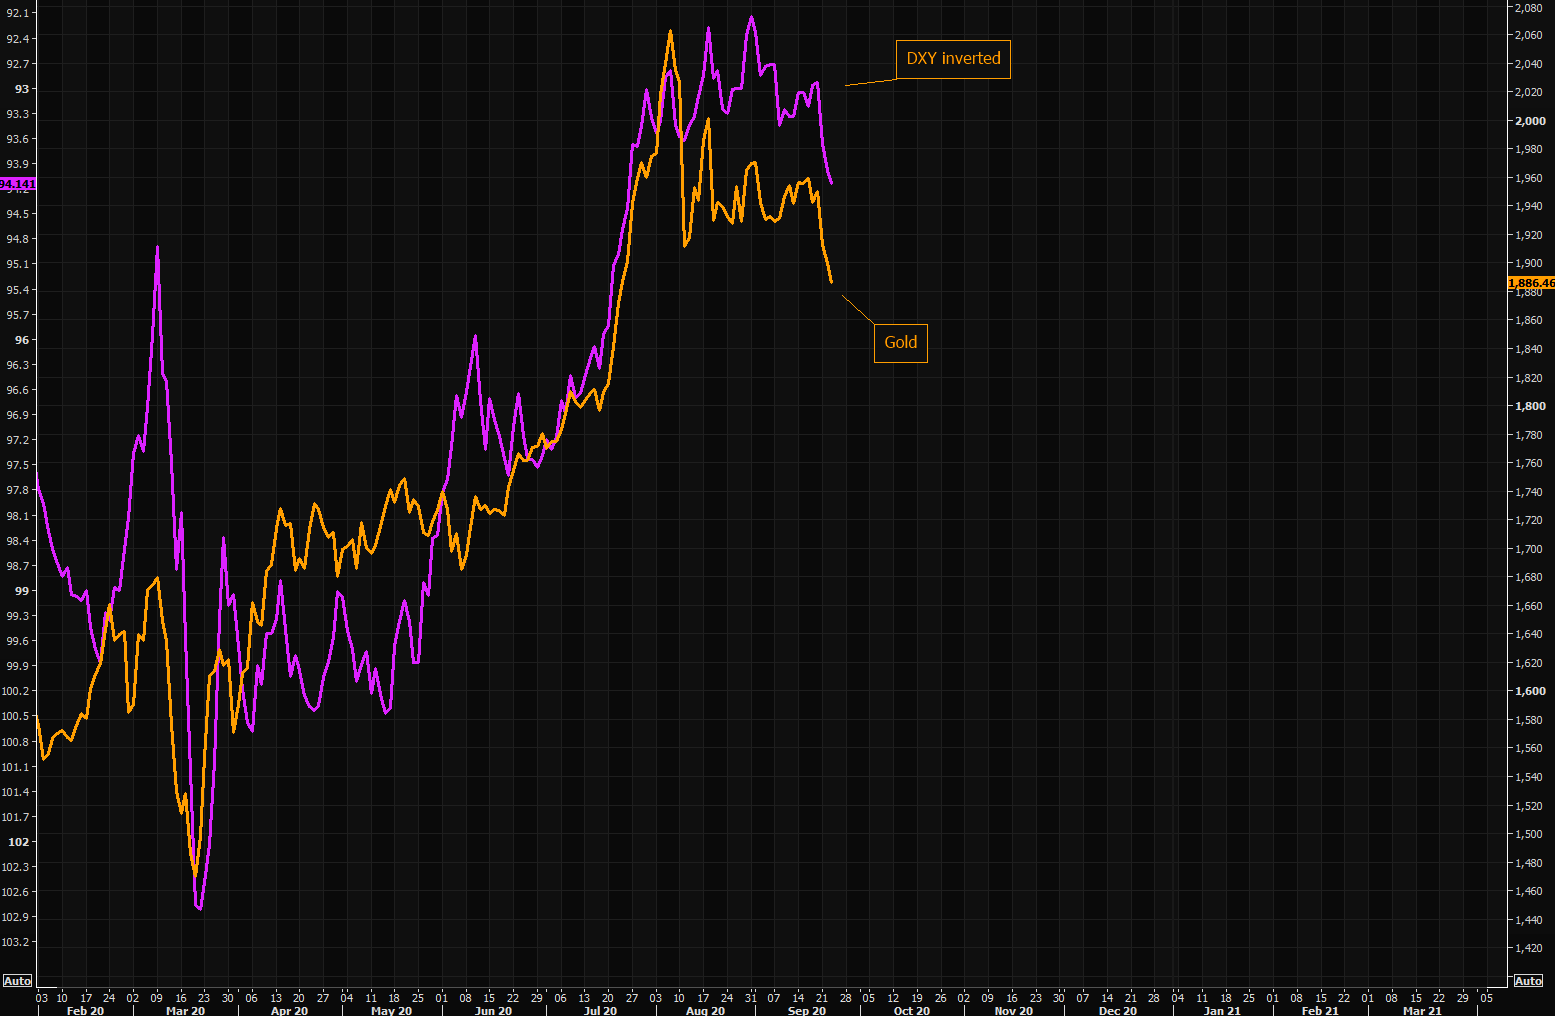 Gold and DXY love